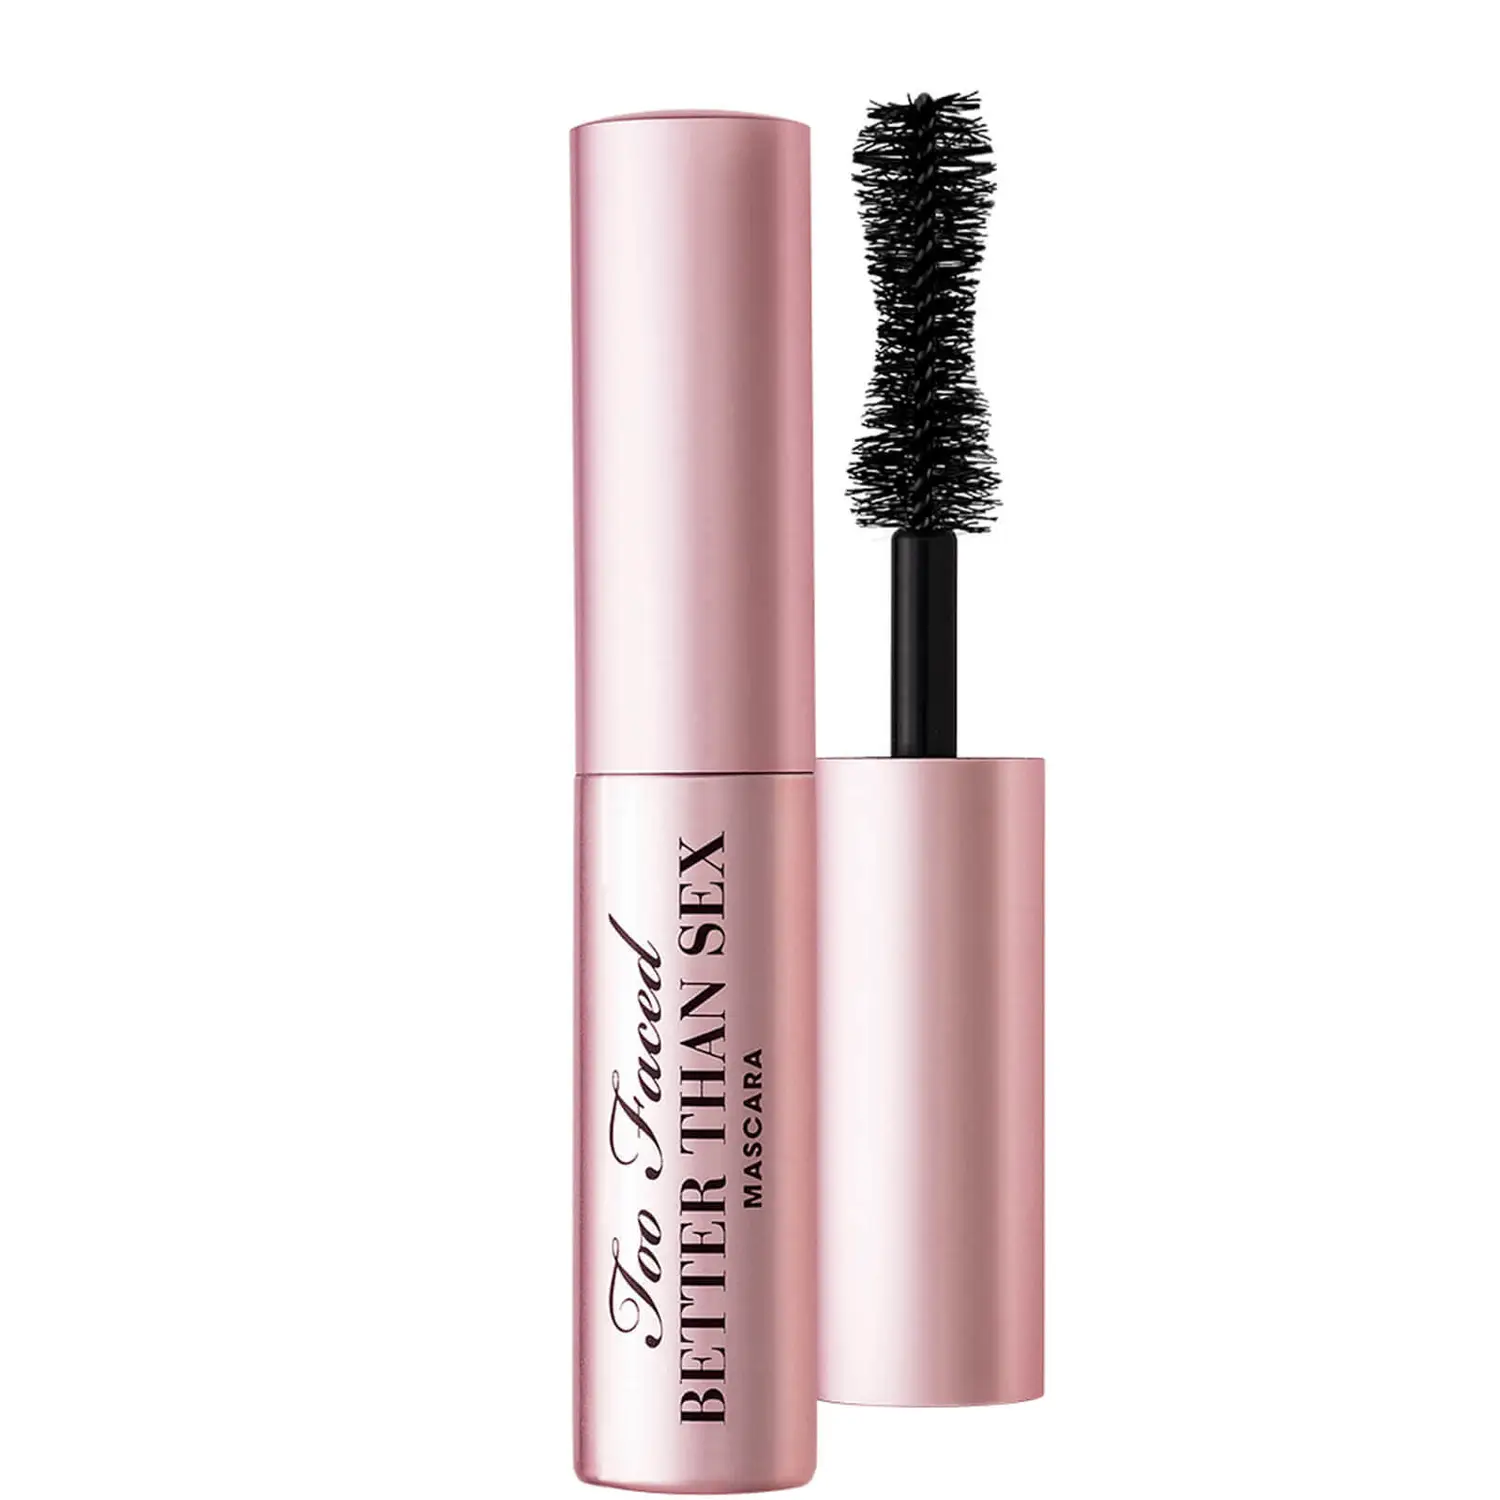 Too Faced Better Than Sex Doll-Size Mascara Black